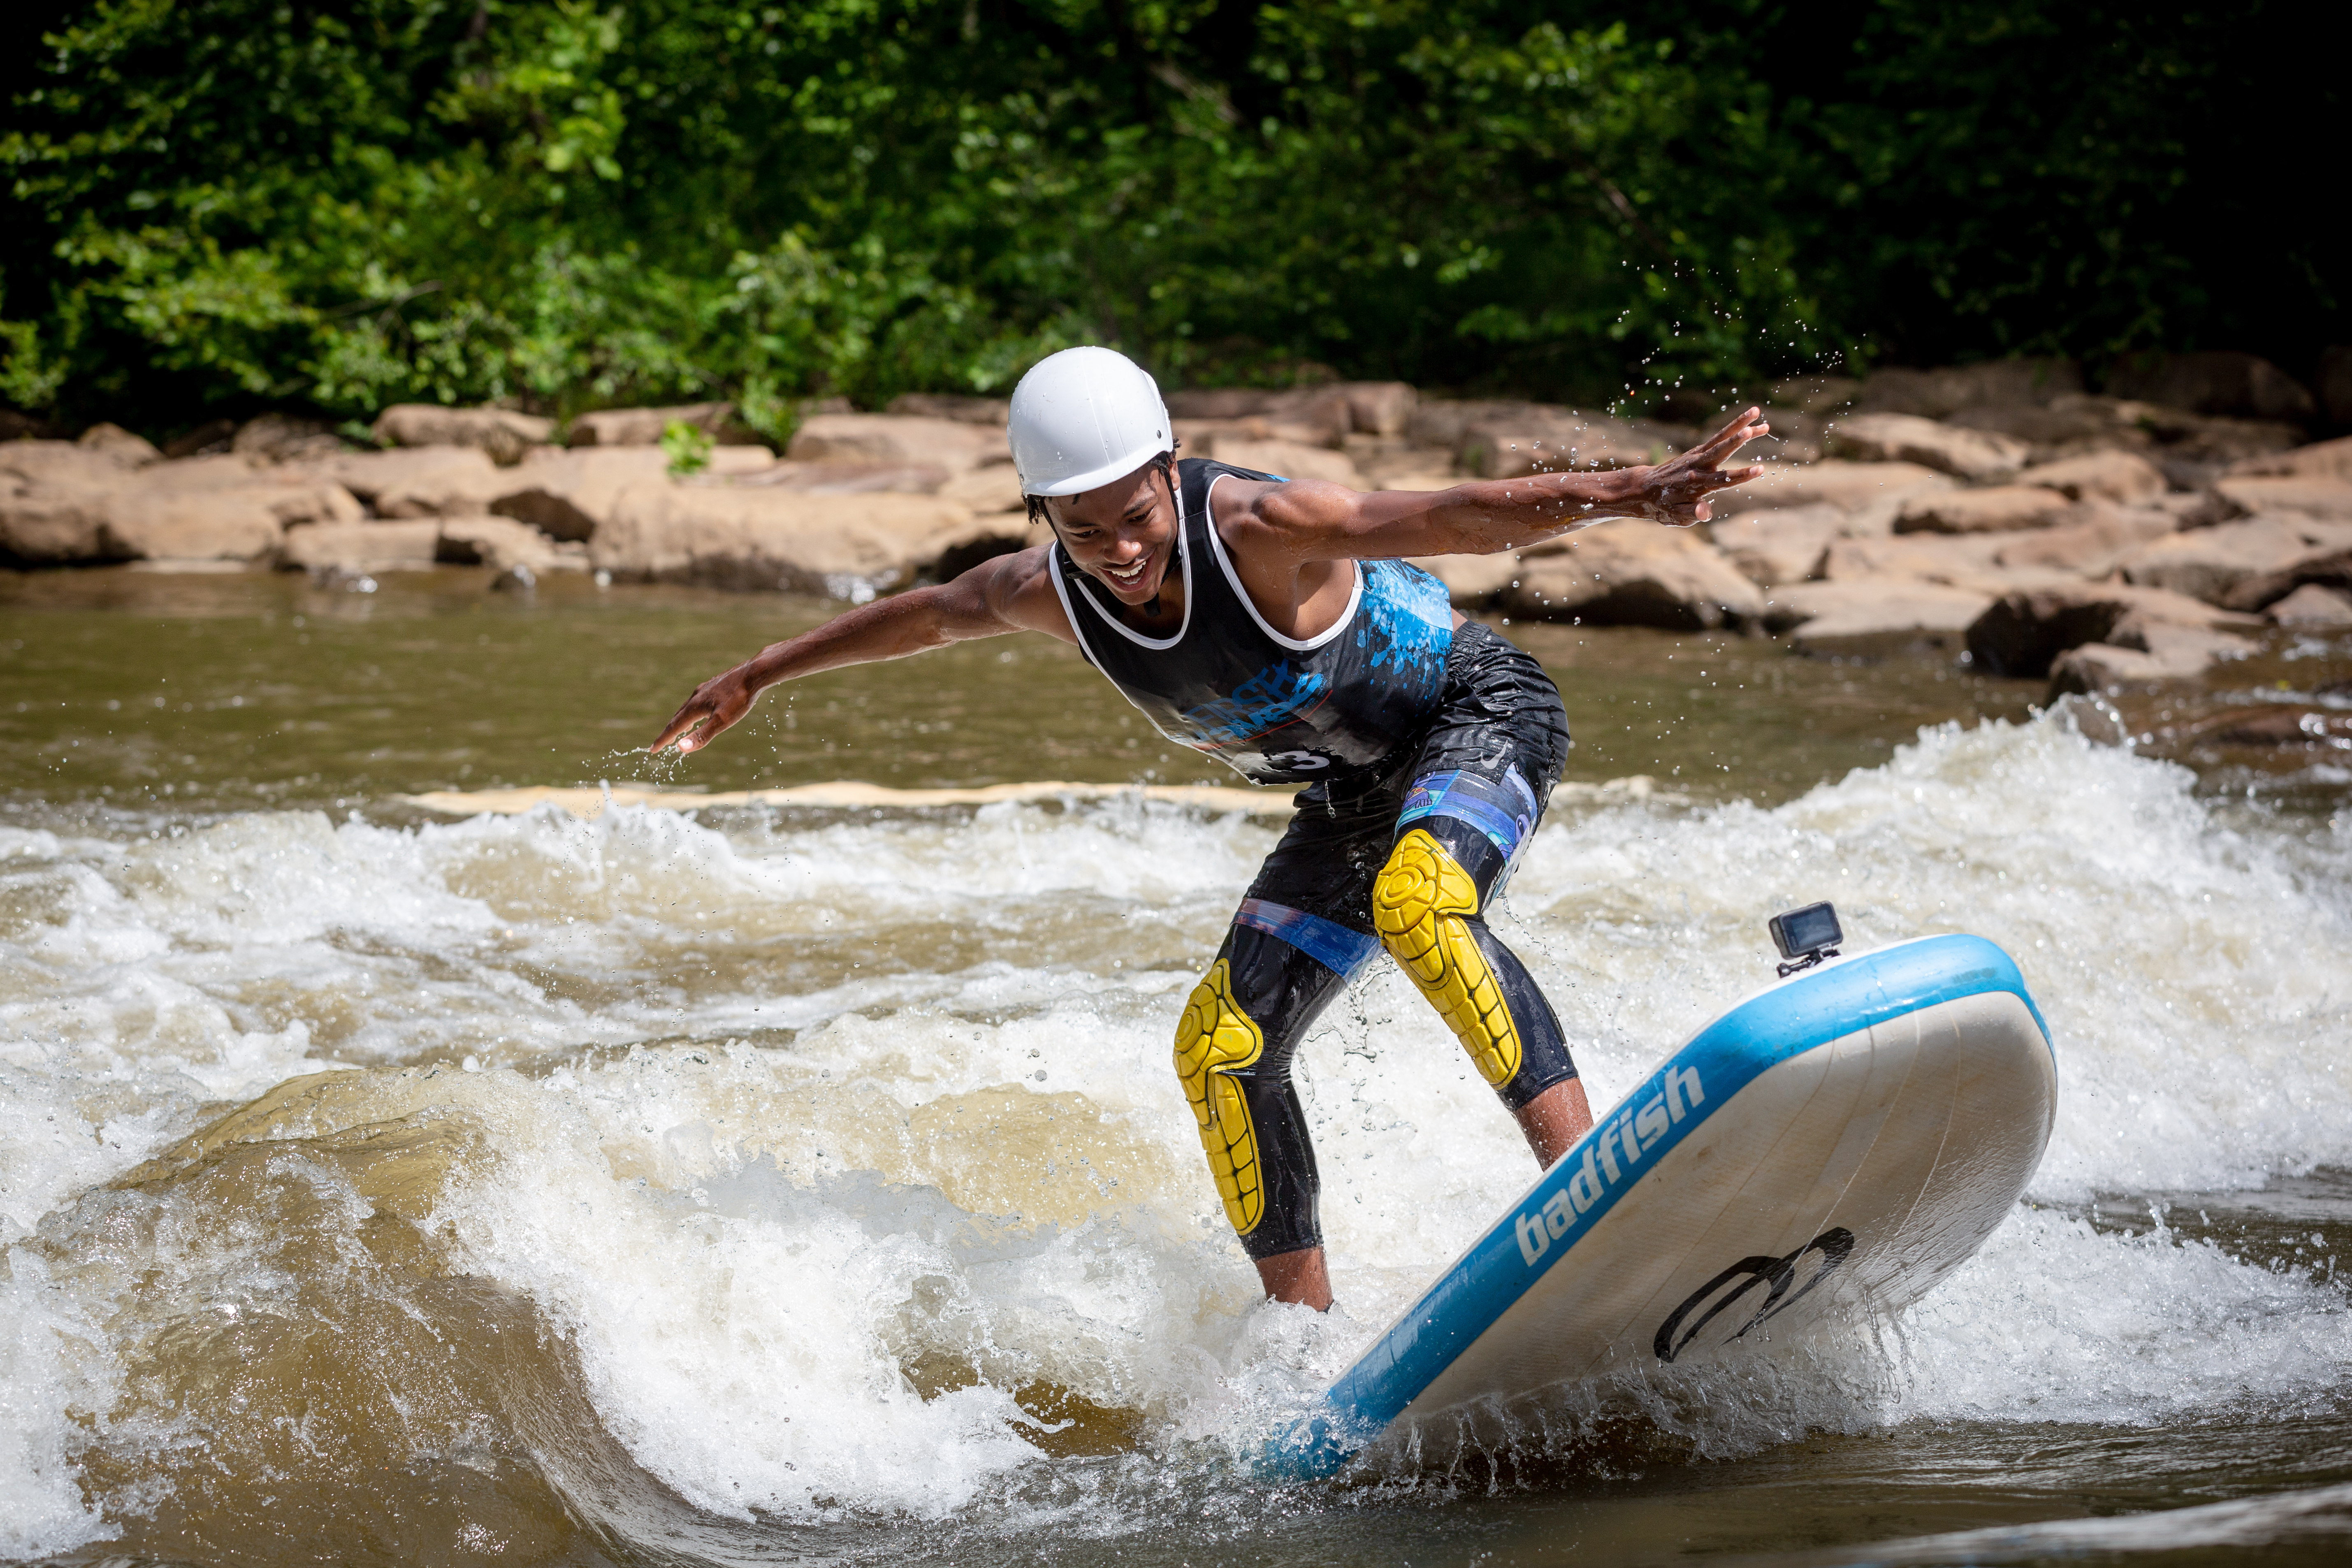 A youth surfs a river wave while smiling